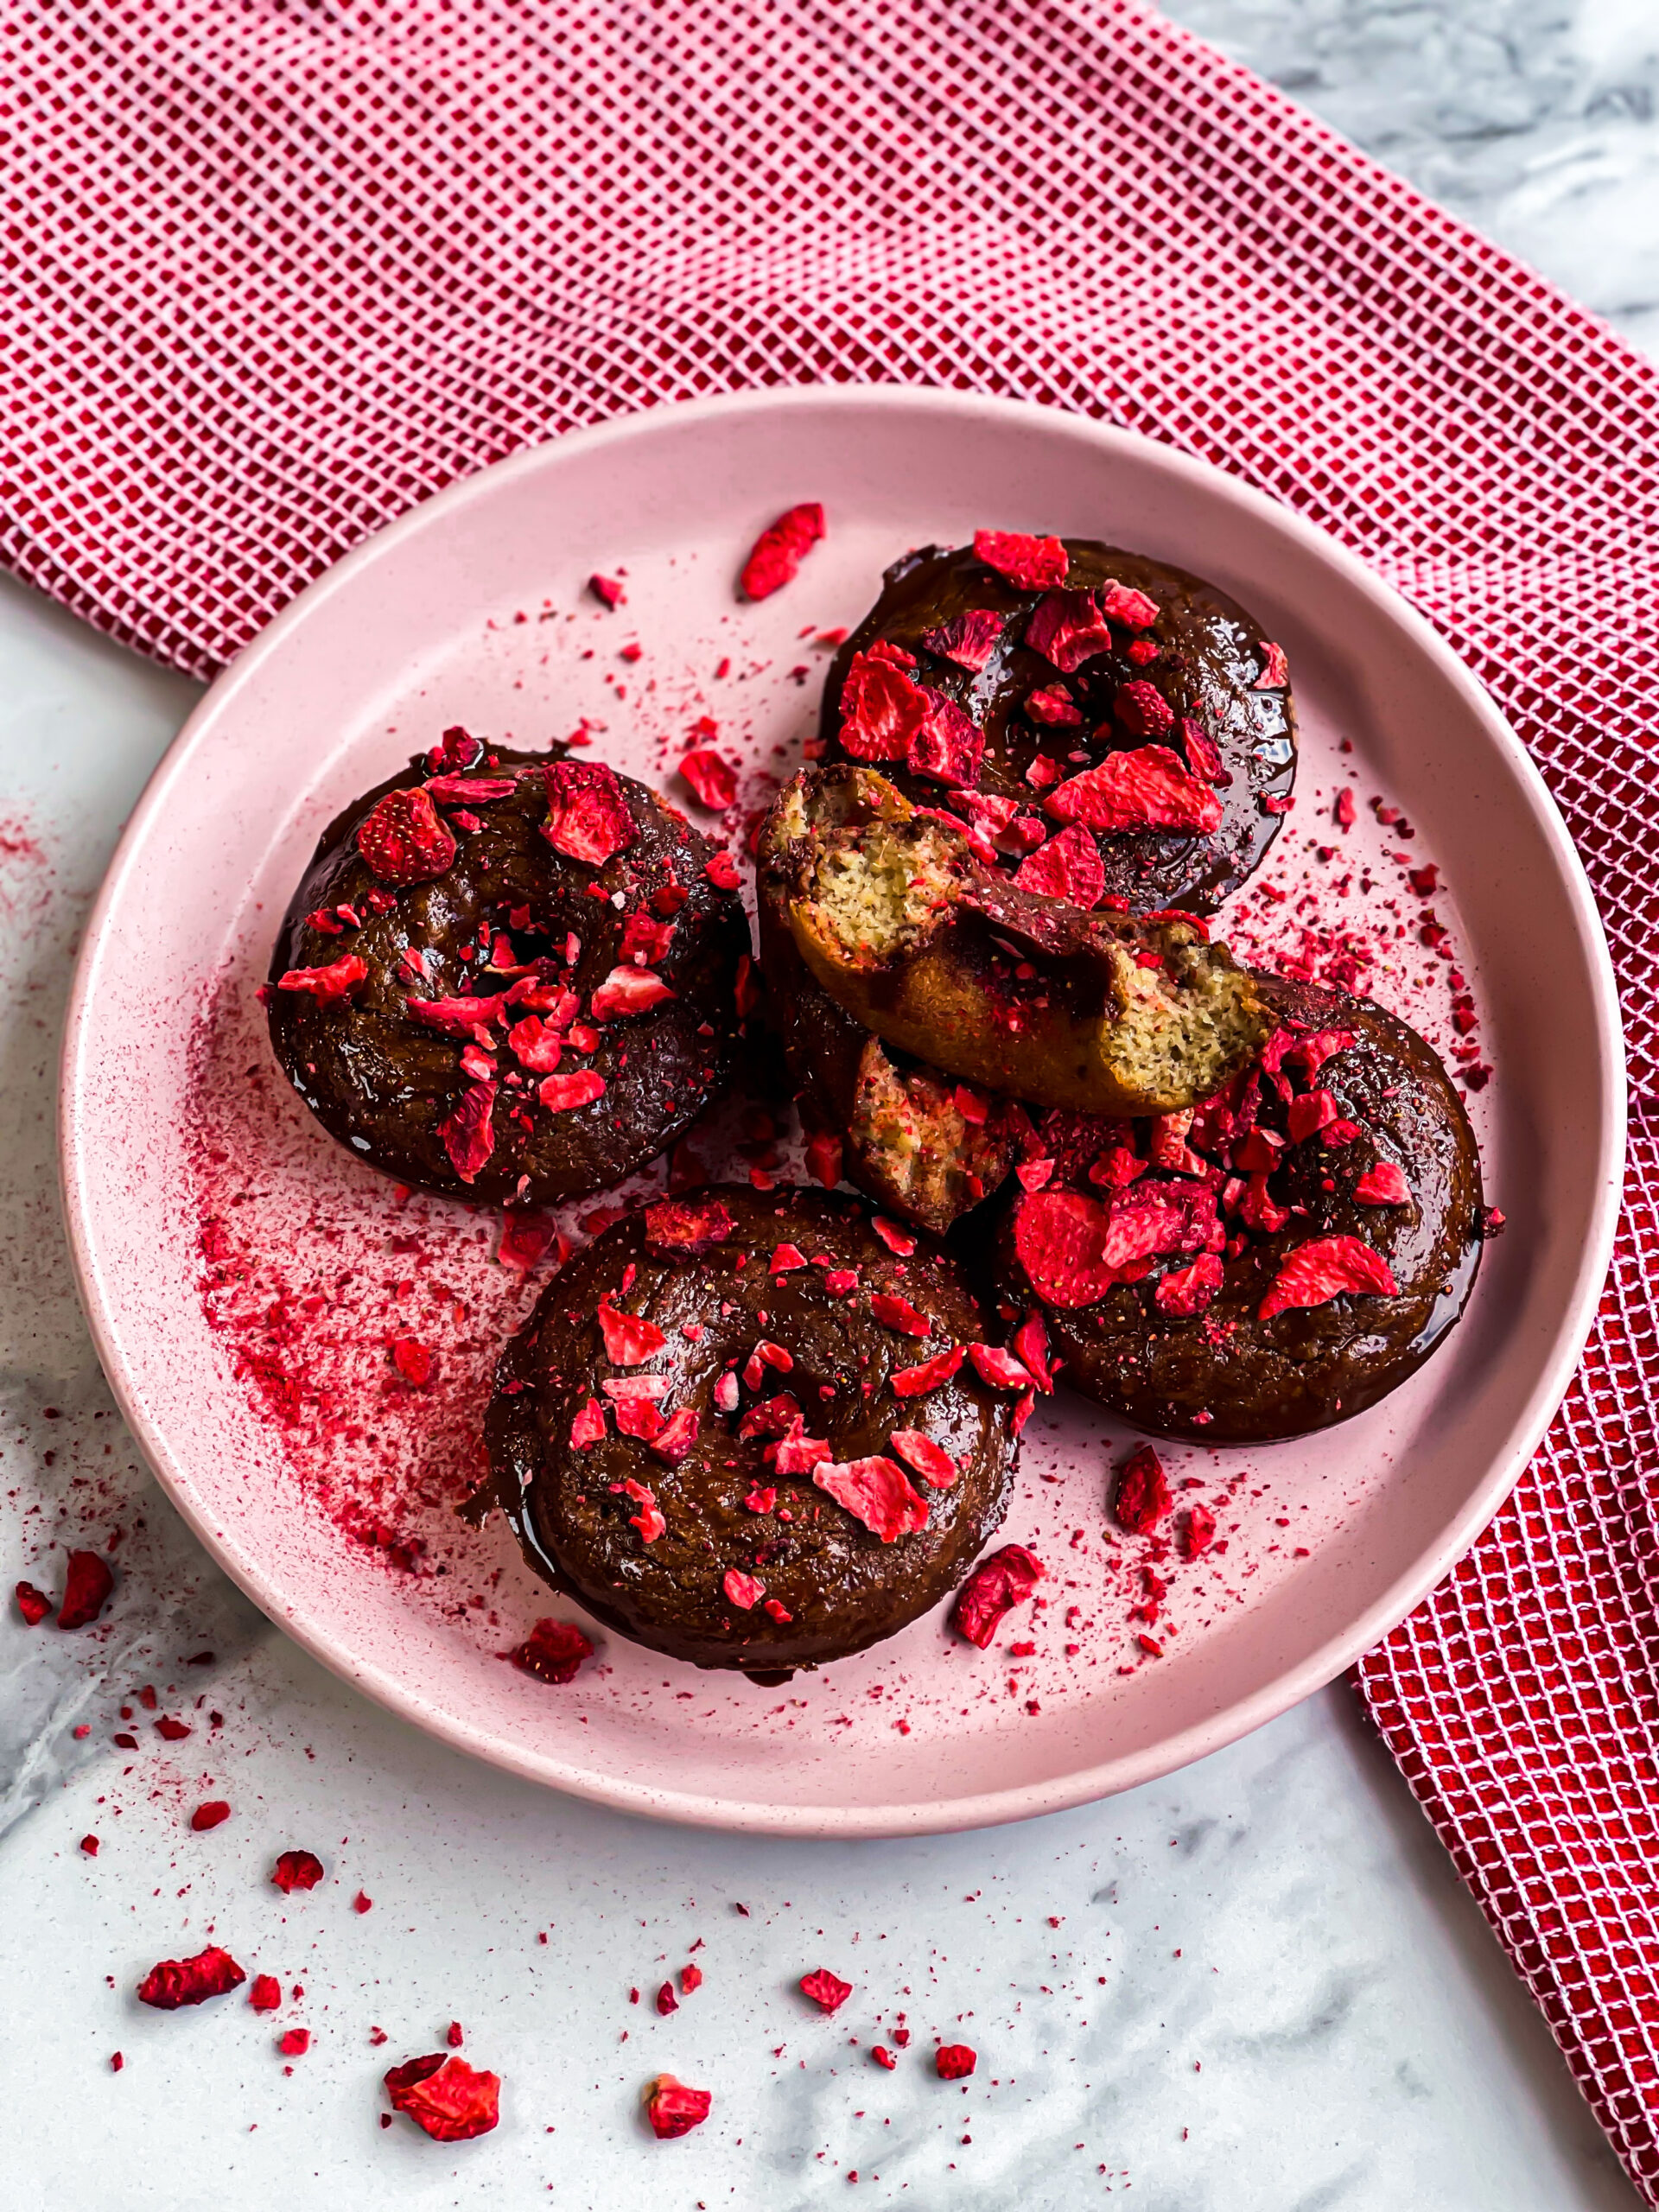 Banana Baked Donuts With Chocolate Frosting And Freeze-Dried Strawberries